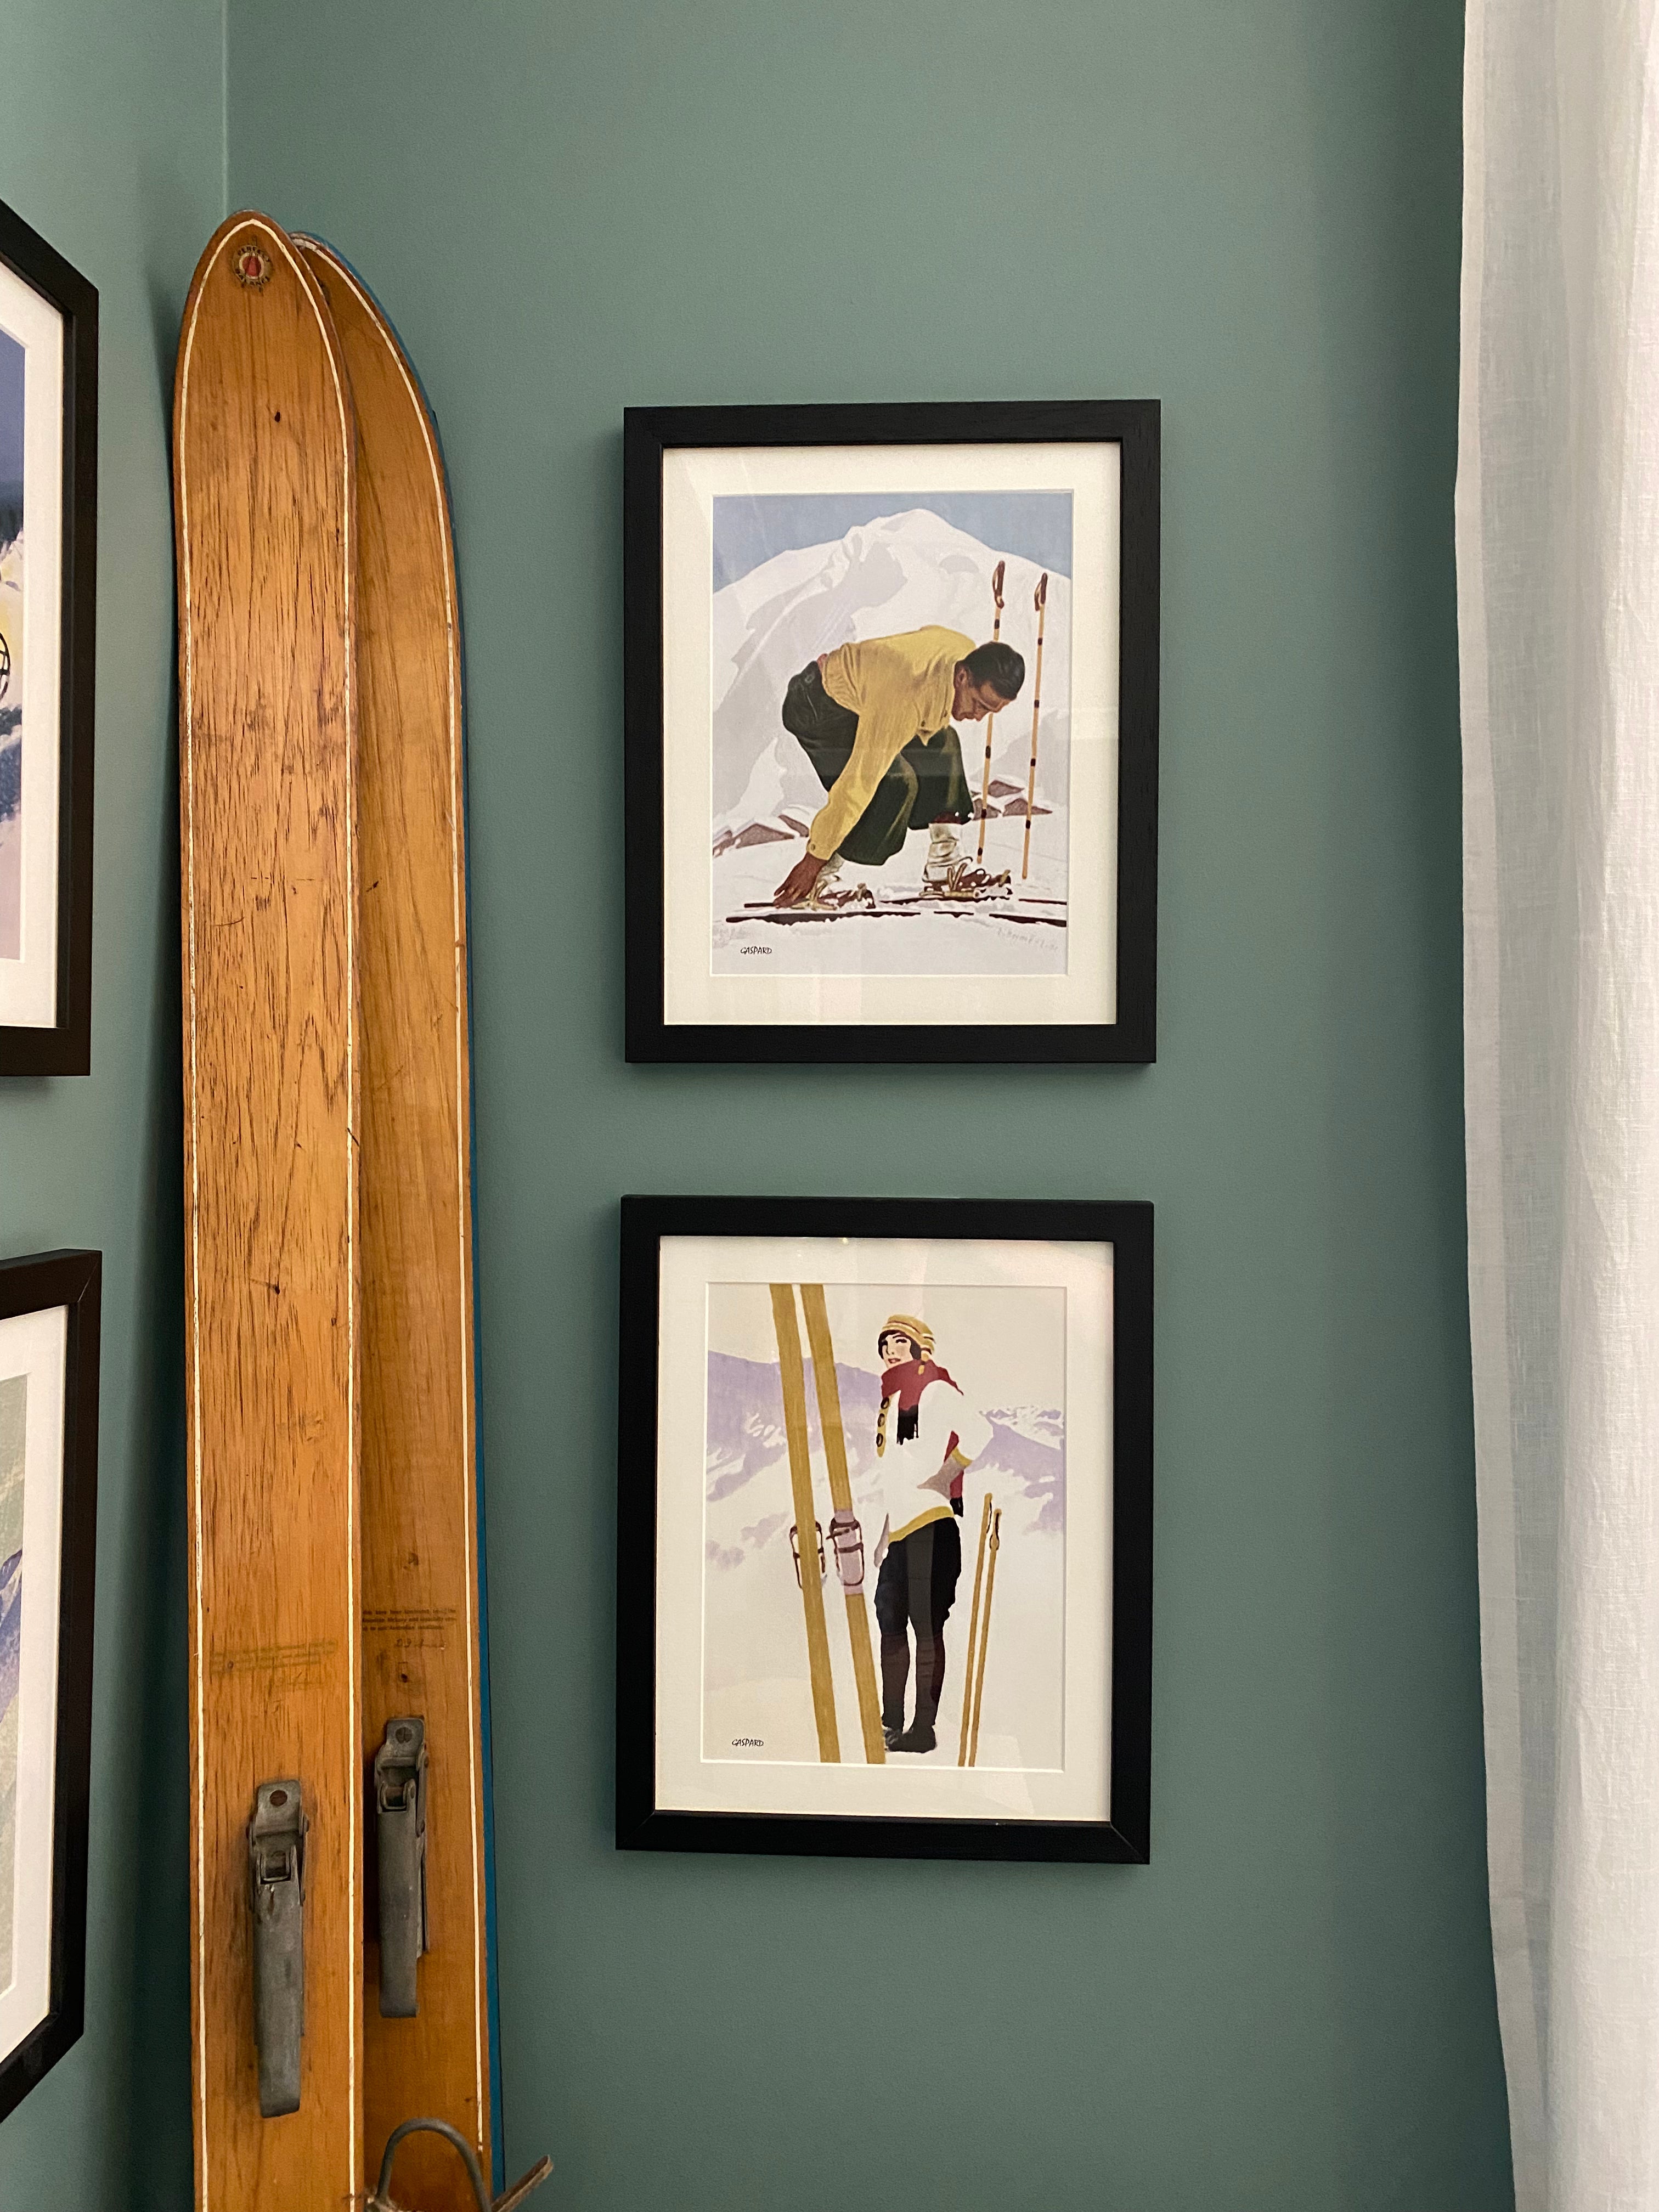 2 vintage black framed photos hanging on a green wall. 1: a woman standing in the snow next to a pair of wooden skis & poles upright in the snow in a white jumper, tan hat, tan gloves, a red scarf & black pants, with a pale sky casting a violet shadow across the mountains, 2; a man in a yellow jumper & green ski pants leaning down to click into his wooden skis, with a white mountain & blue sky in the background. Vintage wooden skis leaning against the wall 